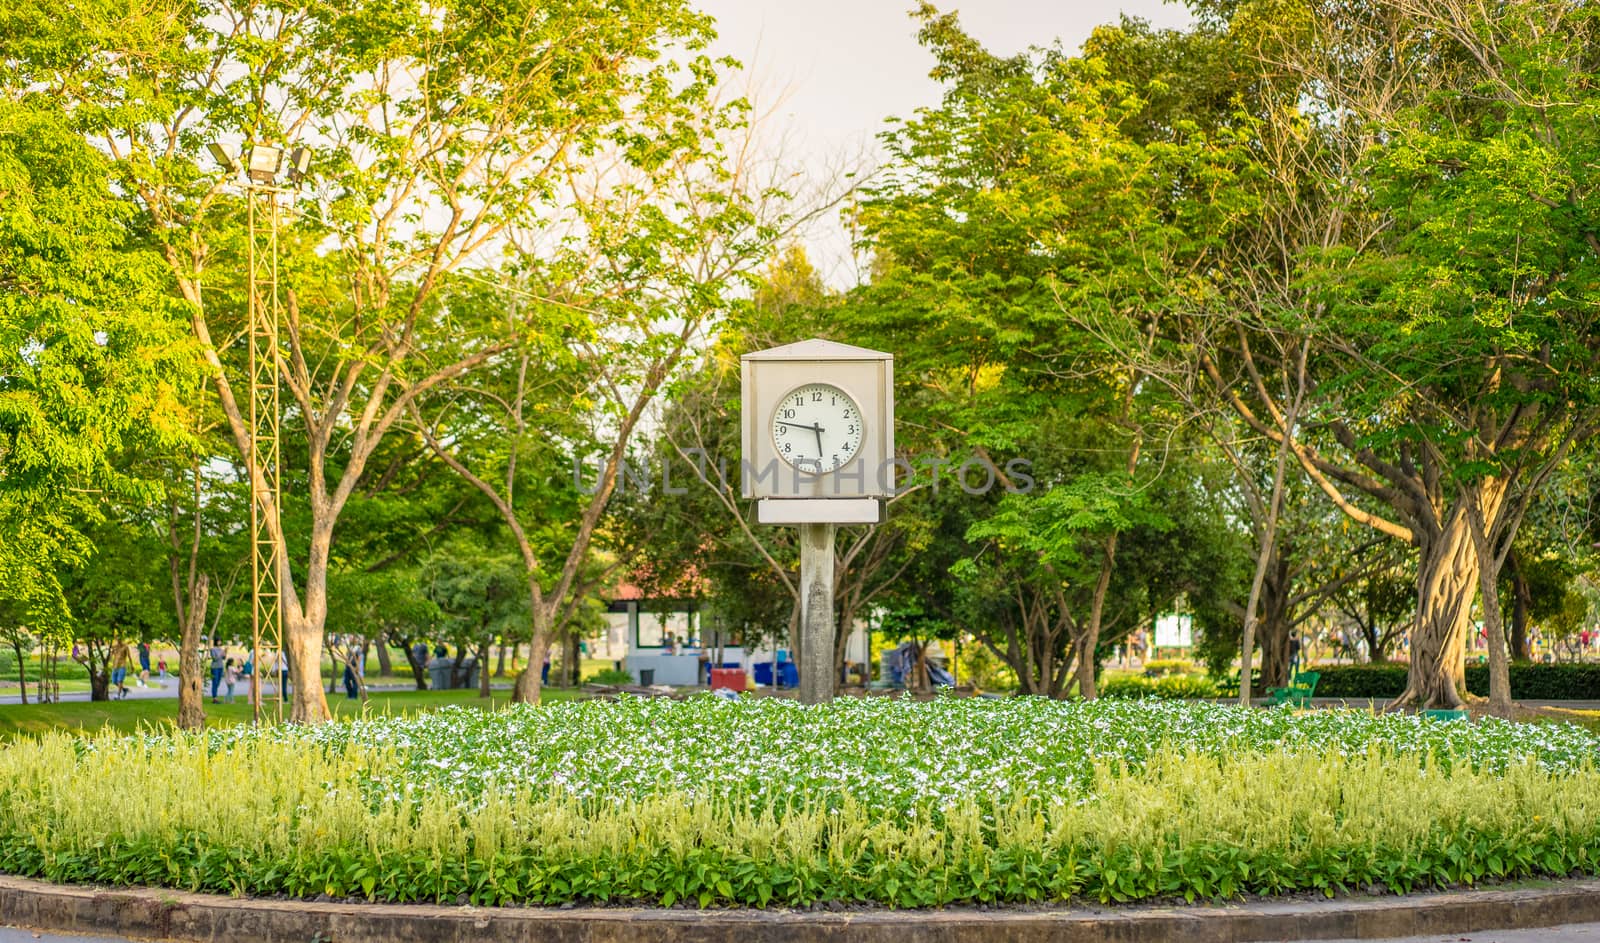 Clock in the park with sunlight